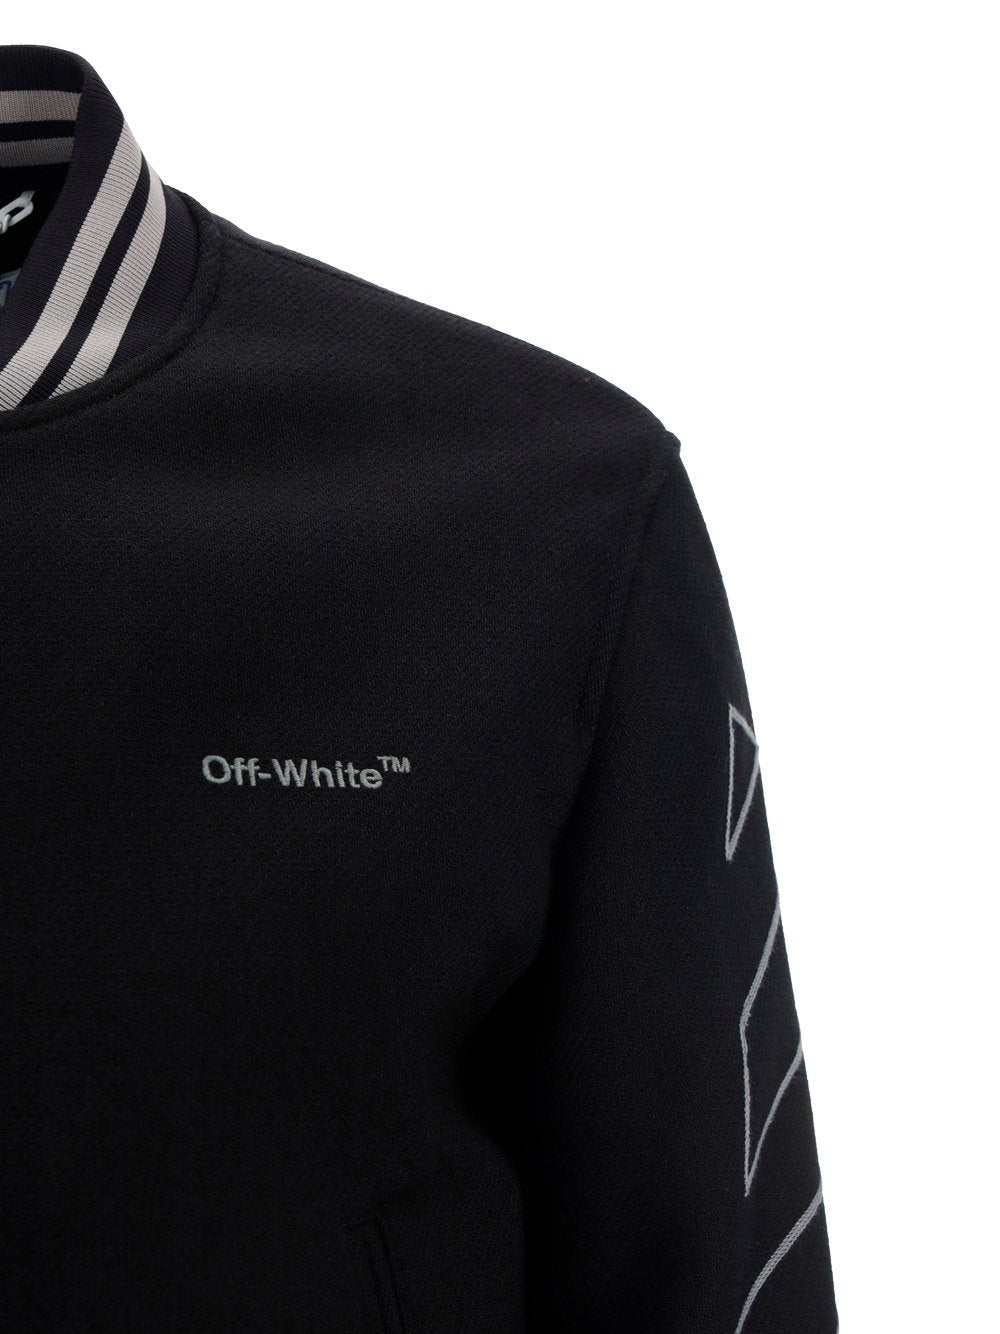 Off-White Logo Embroidered Long-Sleeved Jacket